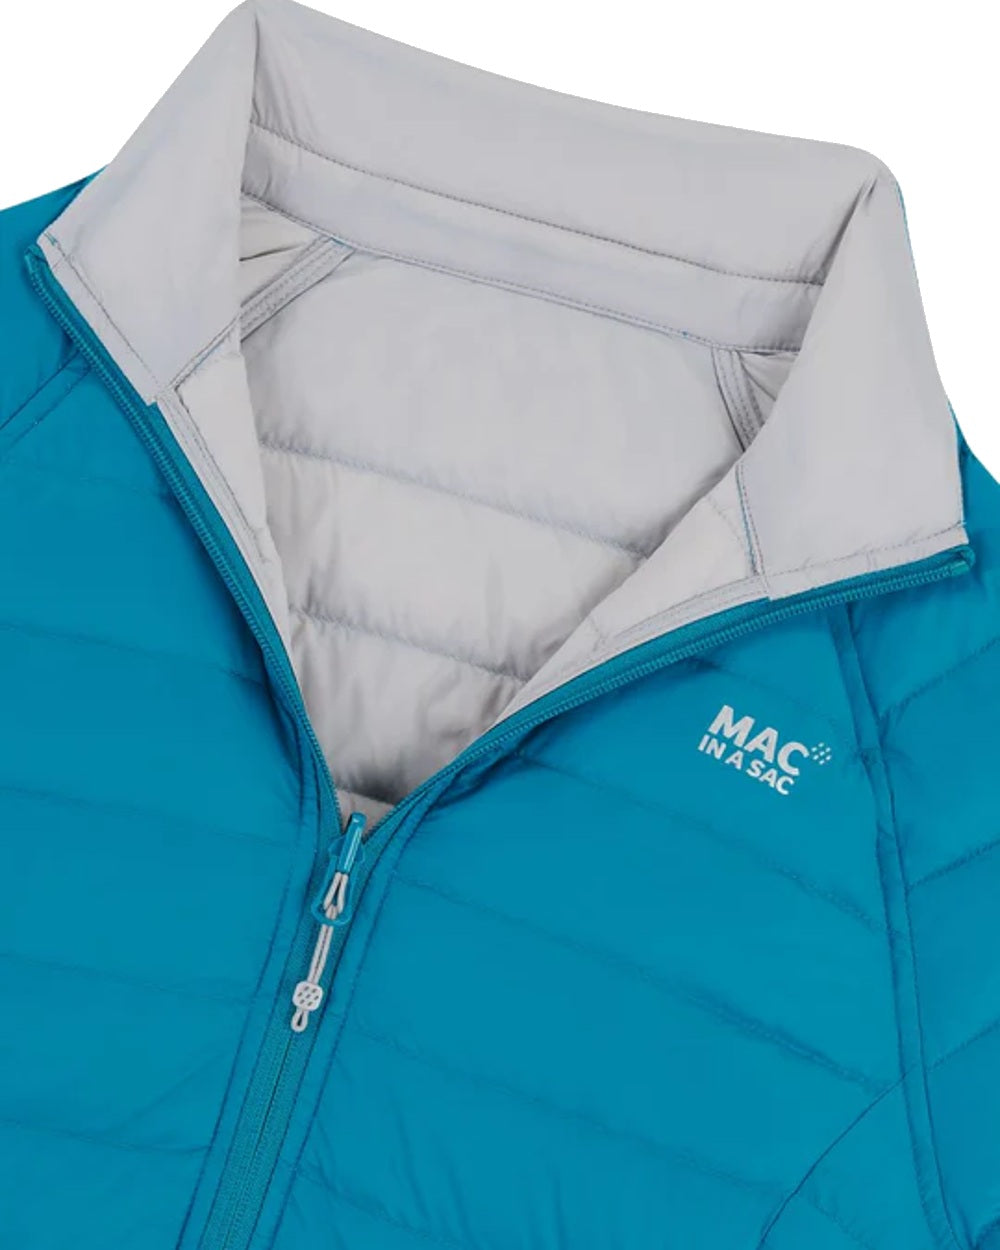 Petrol Soft Grey coloured Mac In A Sac Packable Womens Down Jacket on white background 